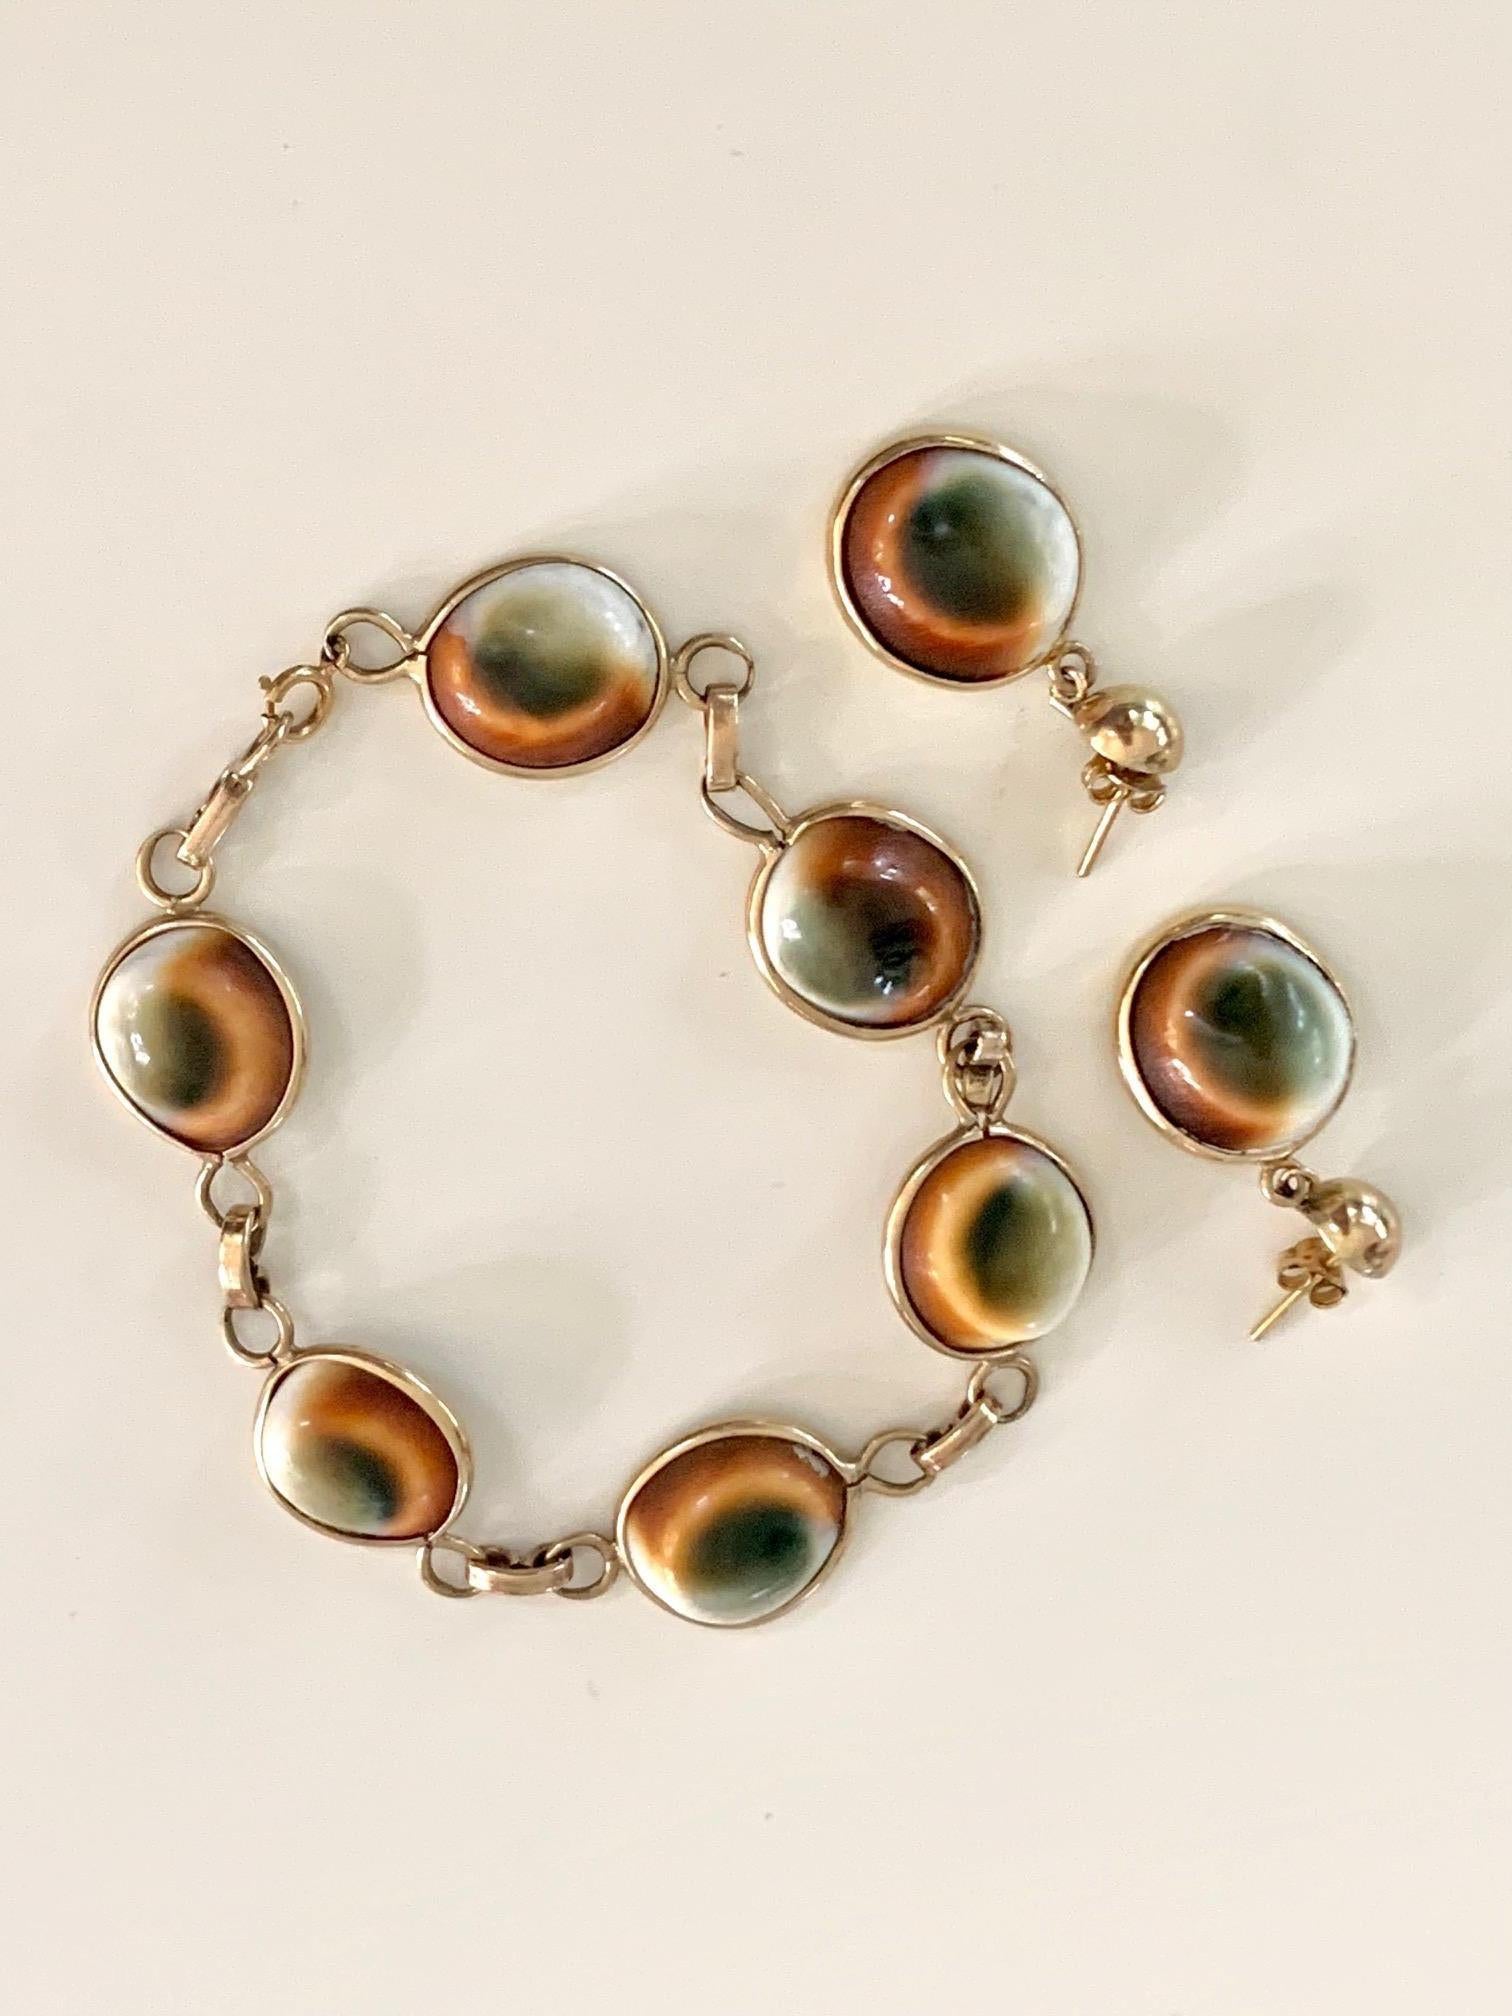 This bracelet and earring set are made from Operculum Snail shells.  It's easy to how they get their 